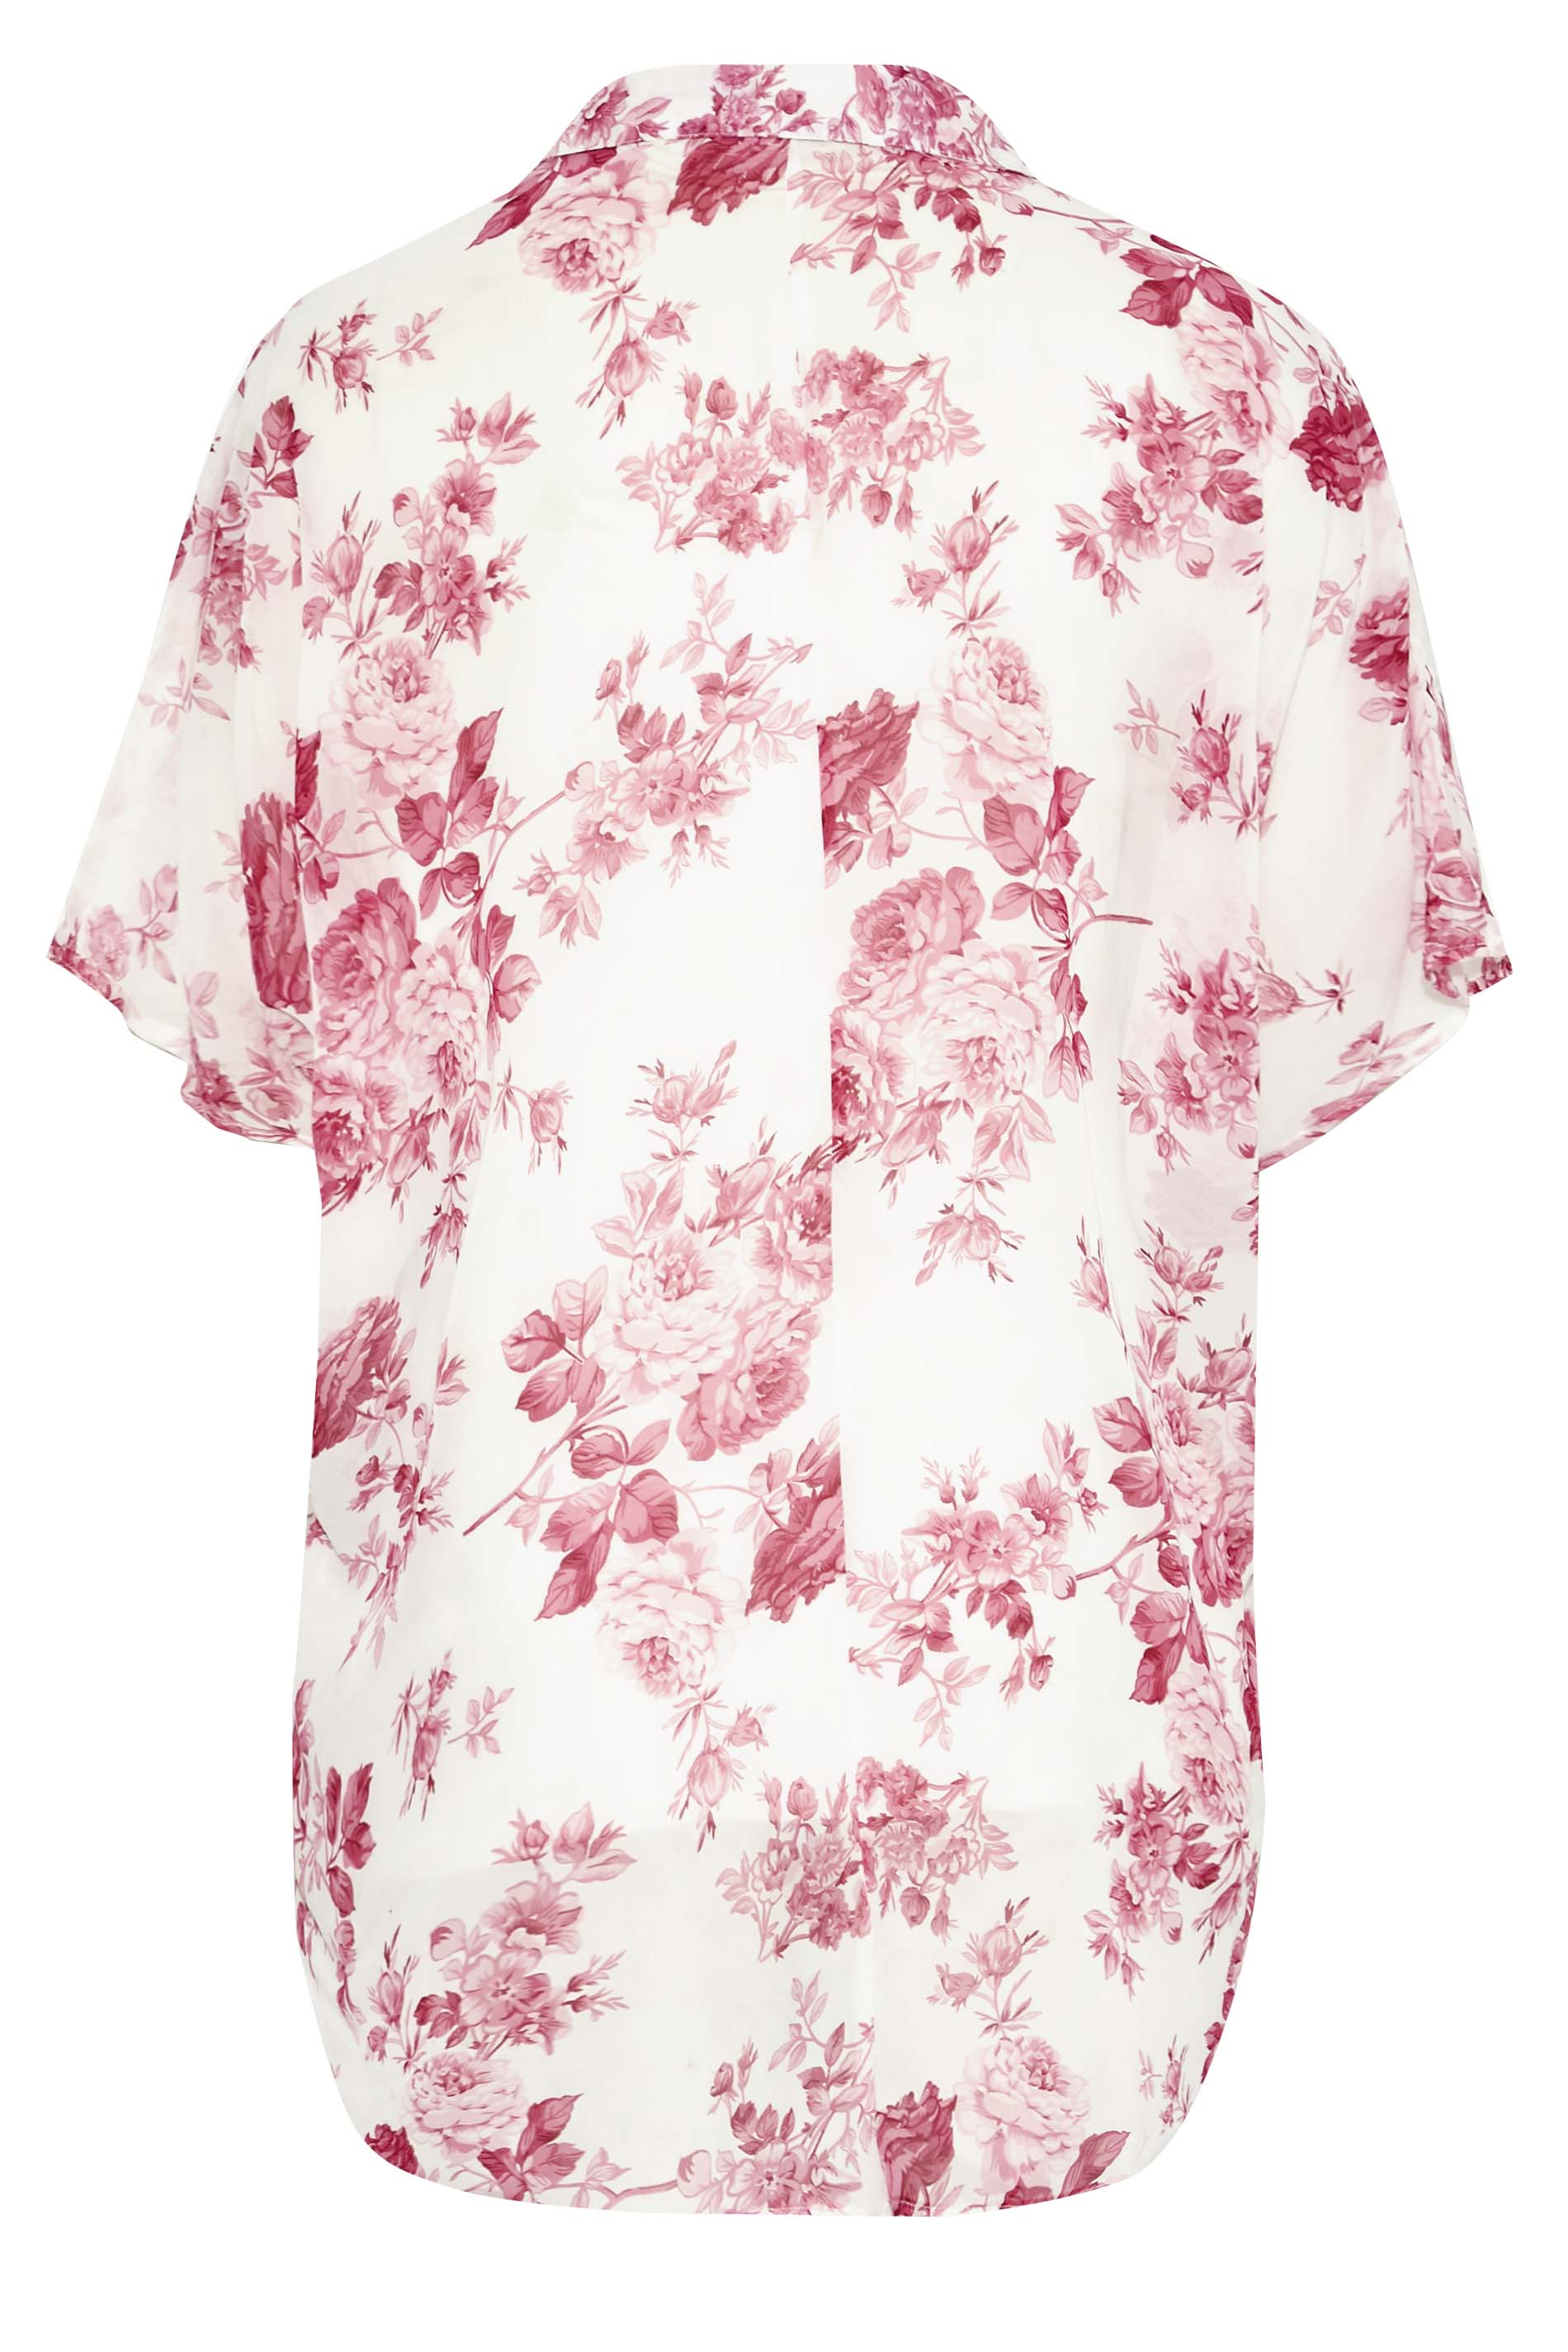 Grande taille  Blouses & Chemisiers Grande taille  Chemisiers | Chemisier Rose Floral Manches Chauve-Souris - OQ93631